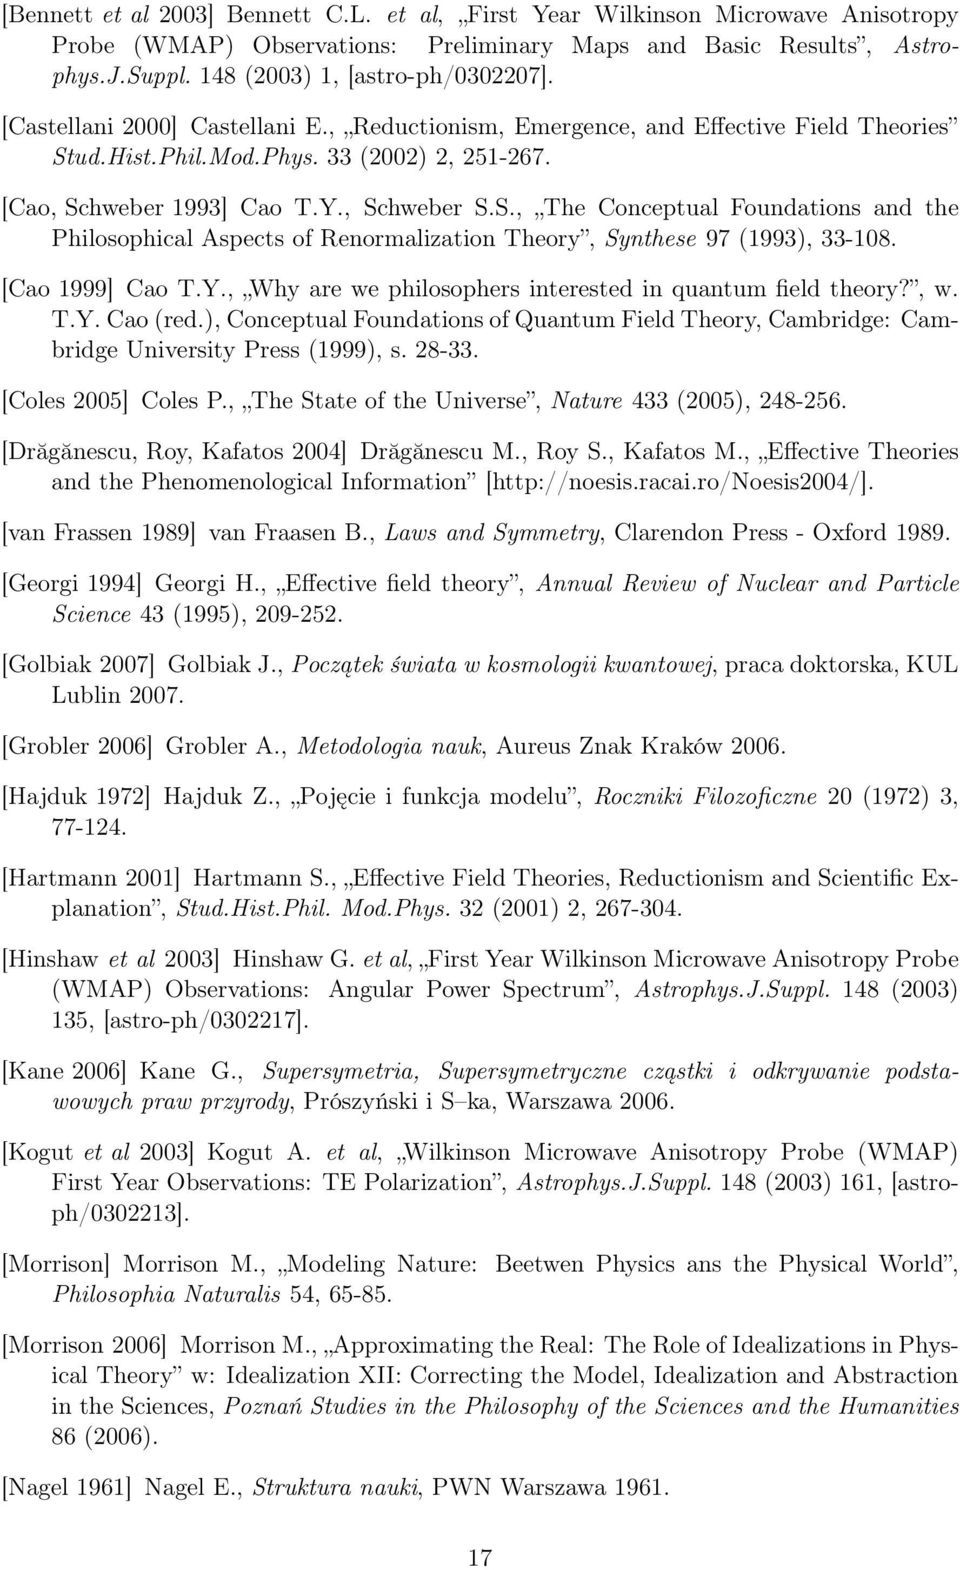 ud.Hist.Phil.Mod.Phys. 33 (2002) 2, 251-267. [Cao, Schweber 1993] Cao T.Y., Schweber S.S., The Conceptual Foundations and the Philosophical Aspects of Renormalization Theory, Synthese 97 (1993), 33-108.